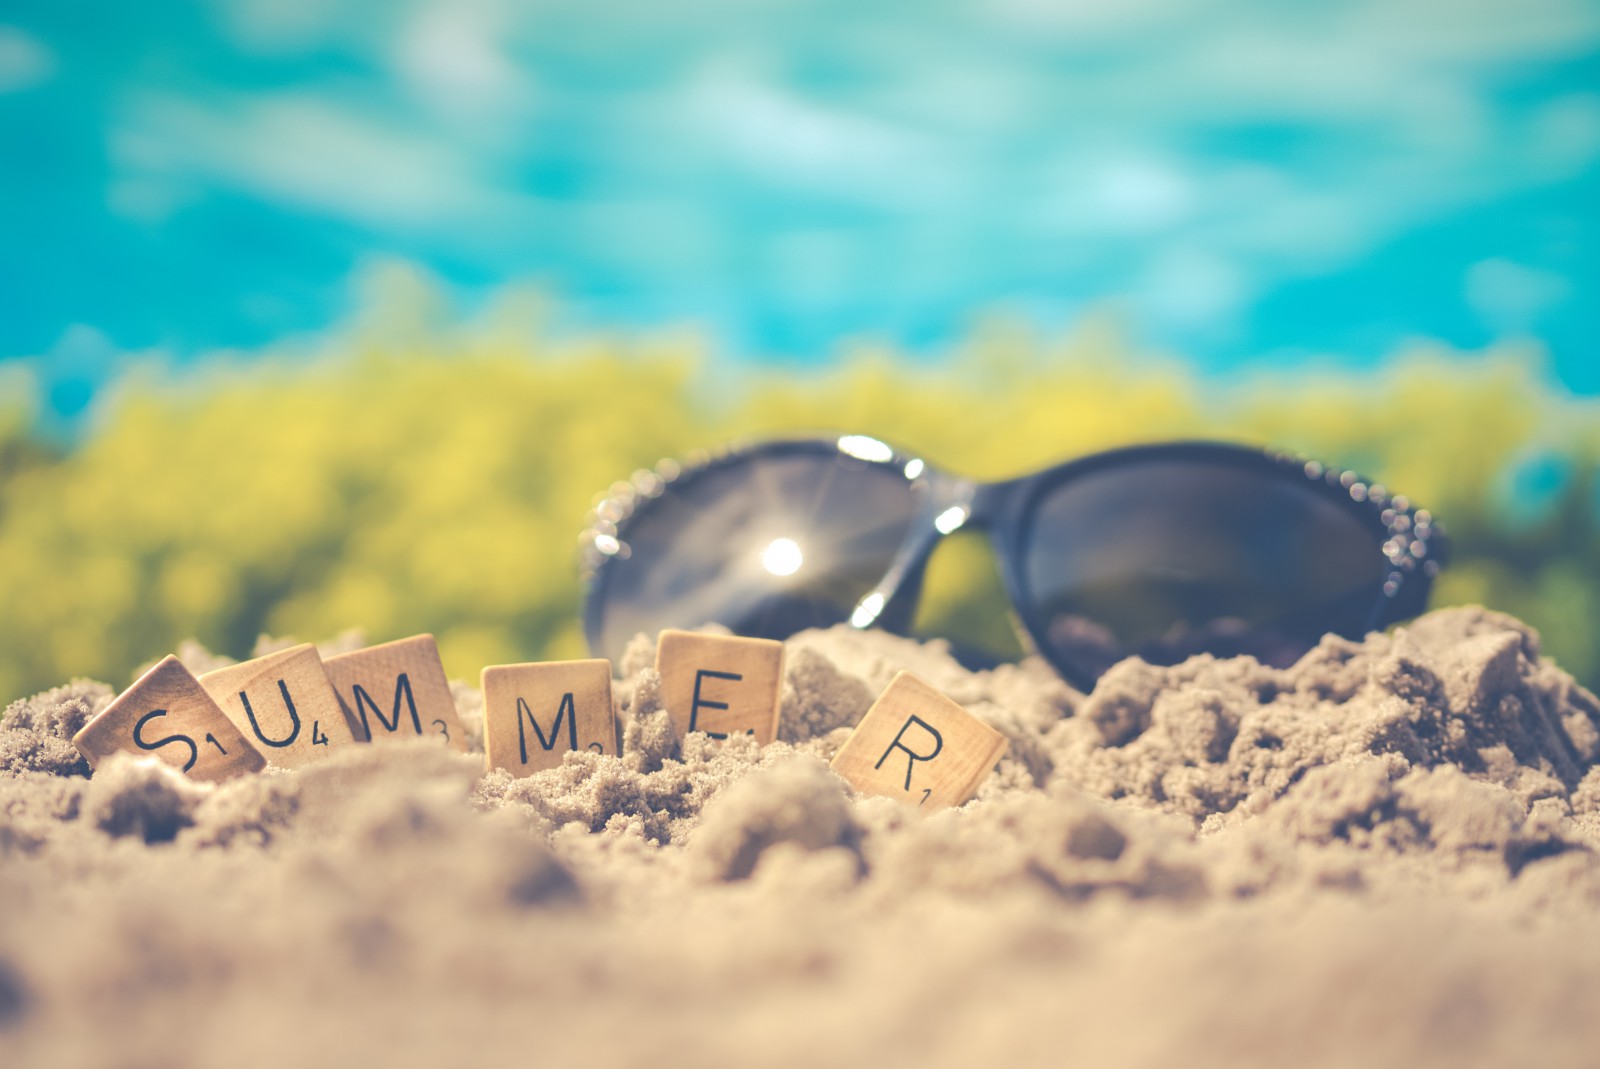 A pair of sunglasses in the sand on a beach, with scrabble letters spelling out summer. 